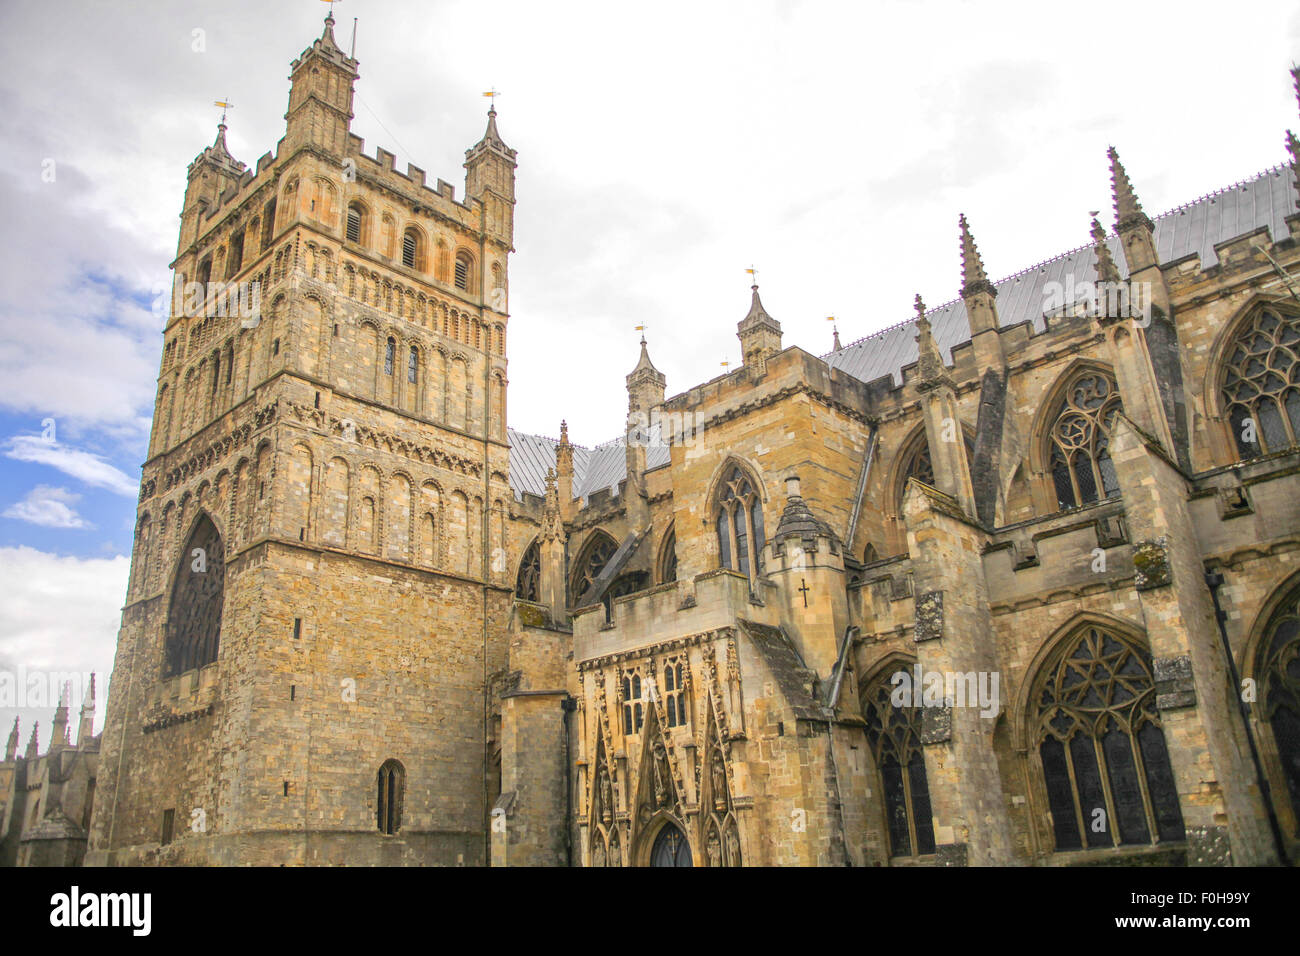 Overview of the Cathedral of St. Peter in Exeter,England Stock Photo